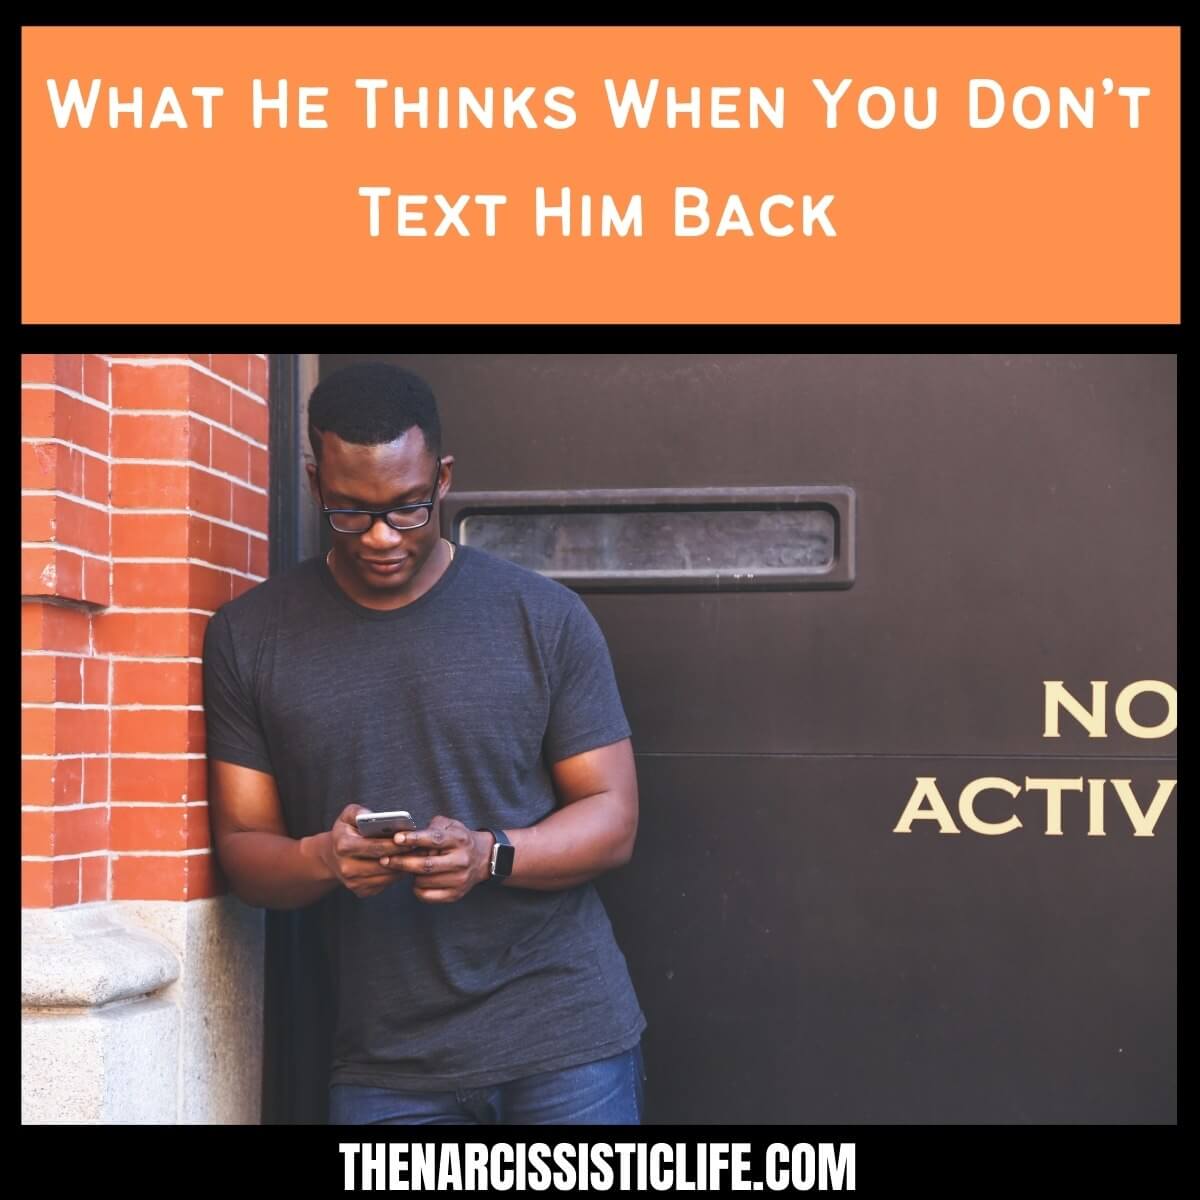 What He Thinks When You Don’t Text Him Back?